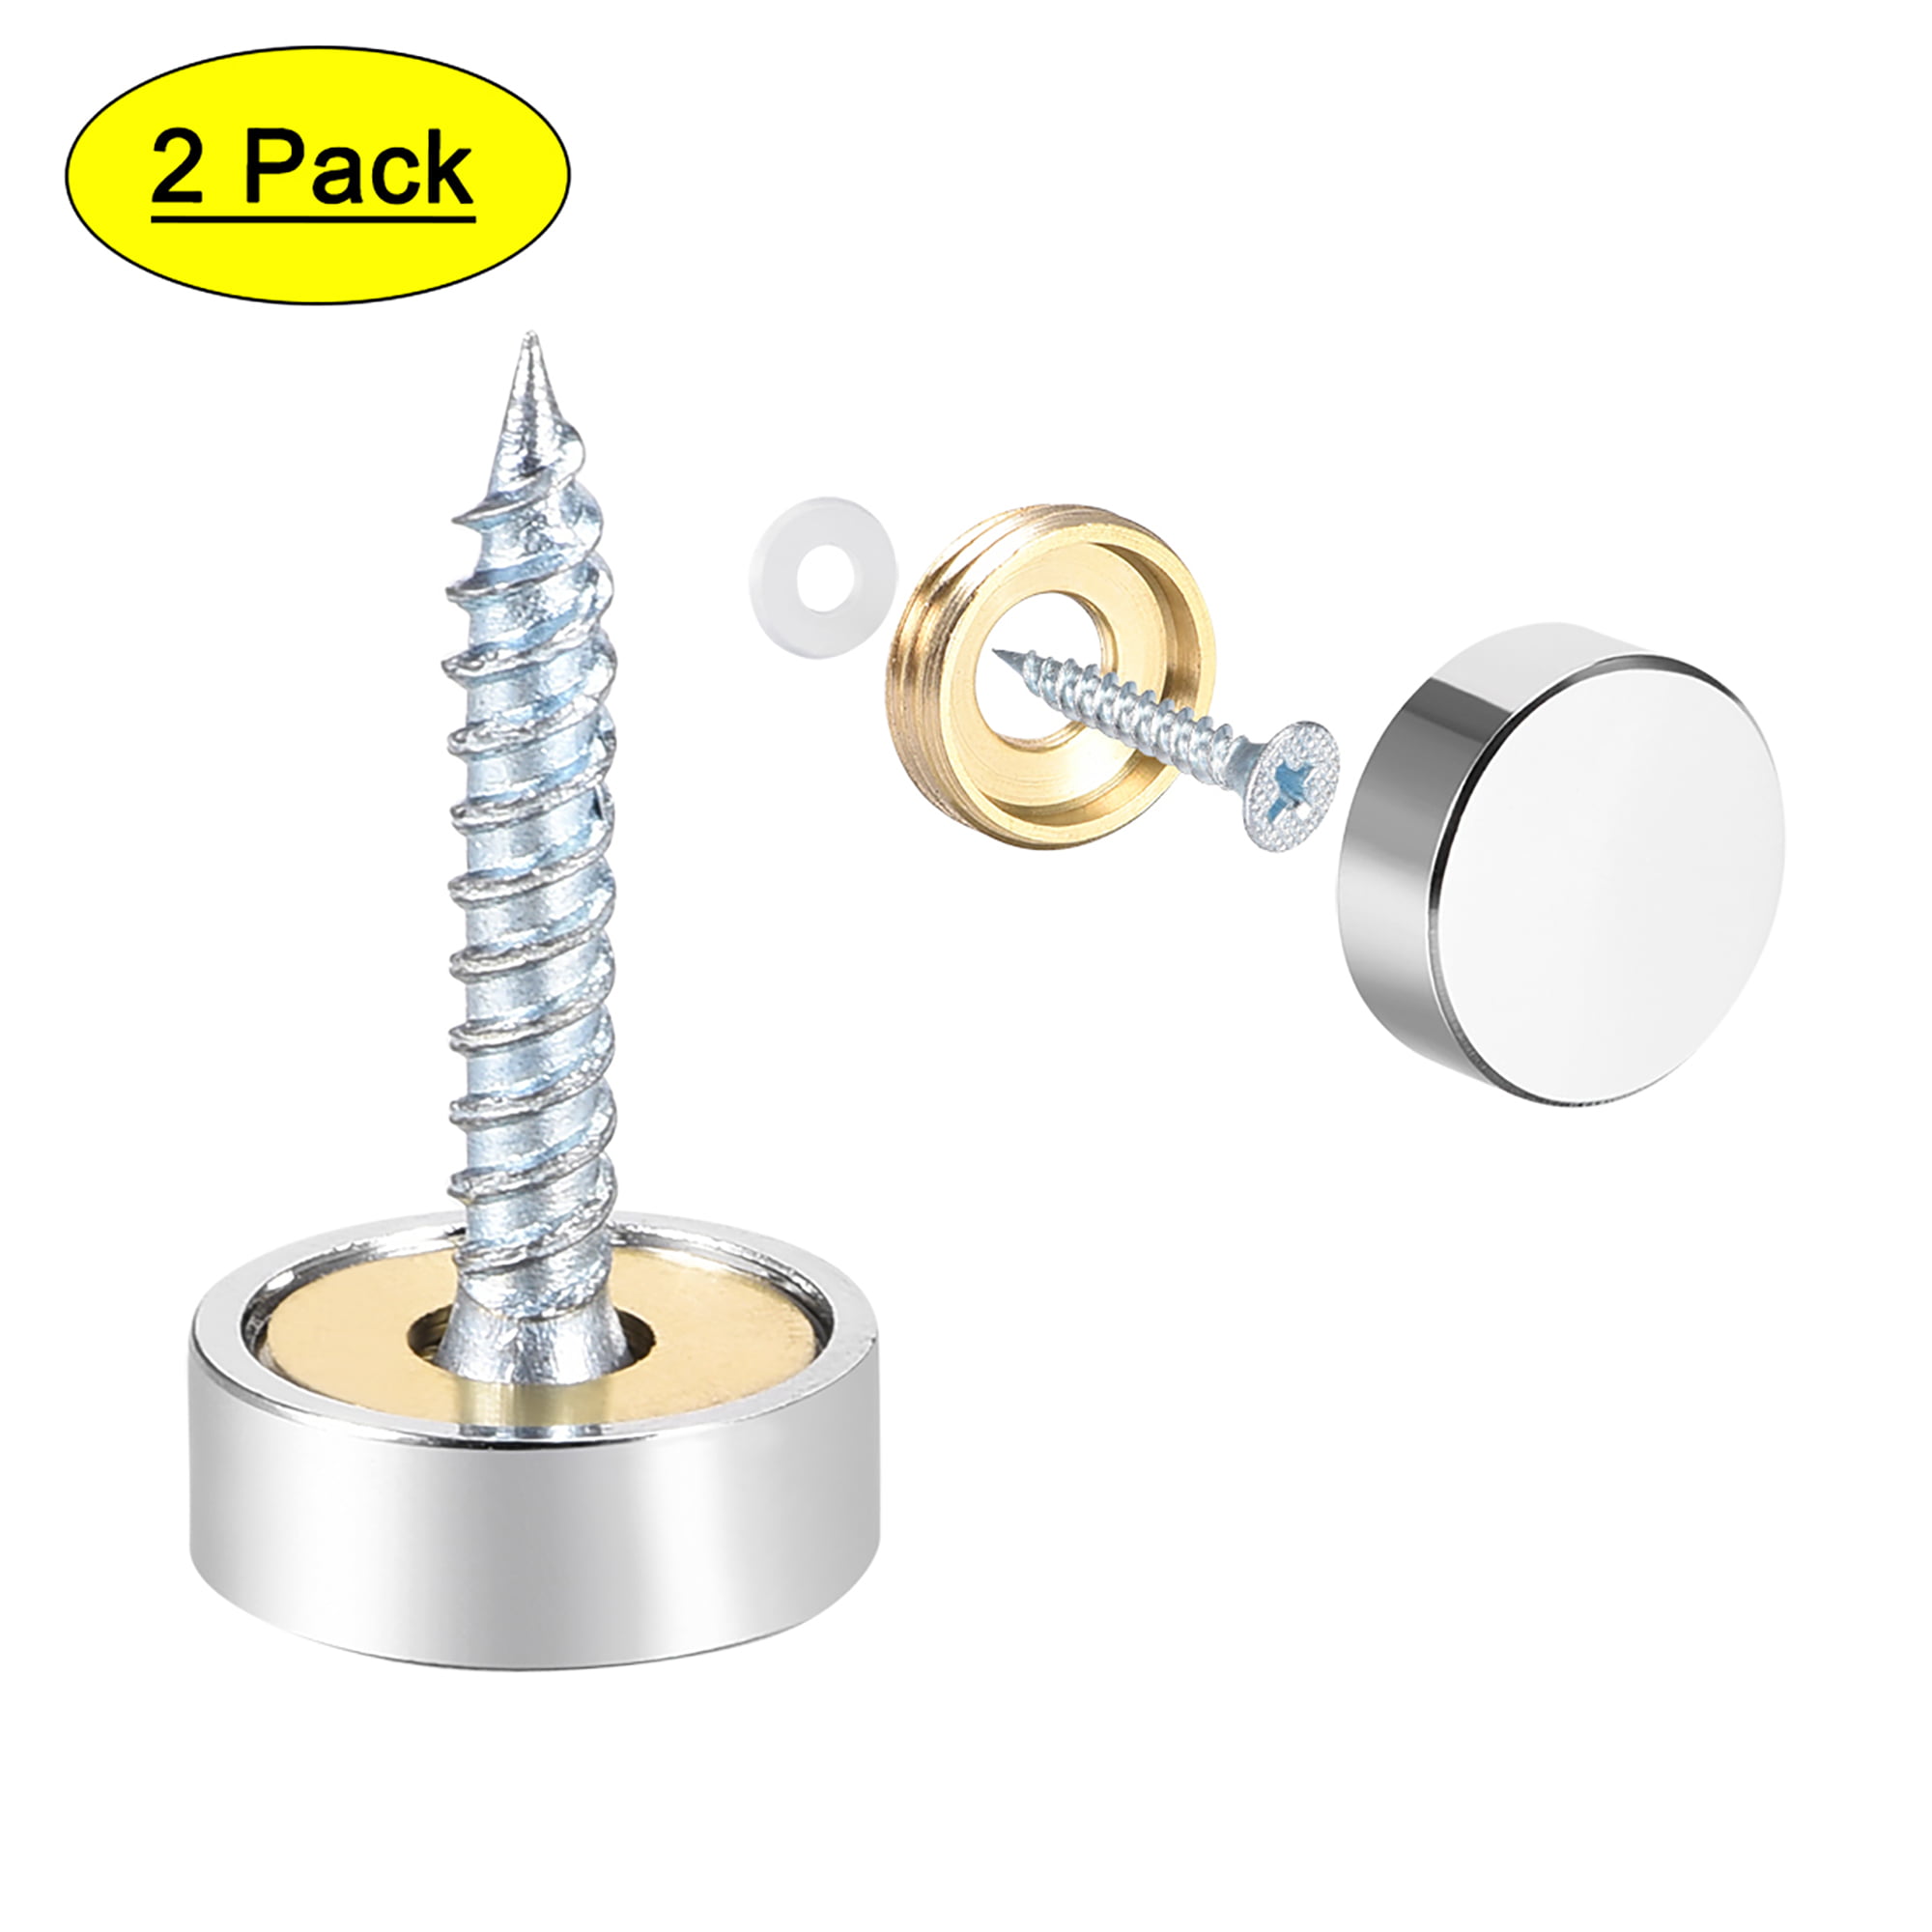 Home Decor Fittings Stainless Steel Mirror Screw Nails 14mm Diameter Cap 50 Pcs 